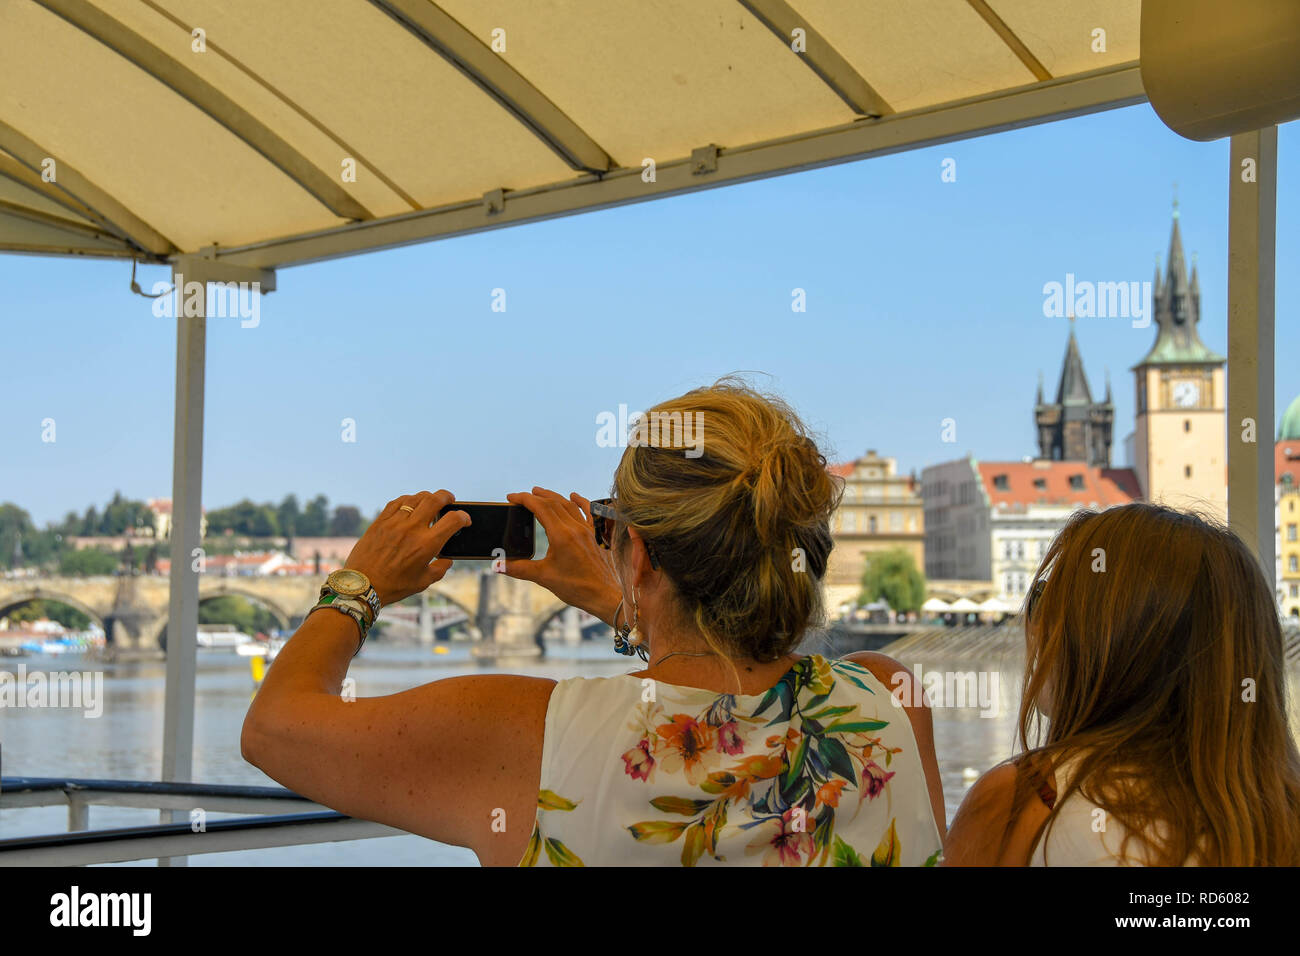 PRAGUE, CZECH REPUBLIC - AUGUST 2018:  Person taking a picture on a river cruise boat  in Prague using a camera phone. Stock Photo